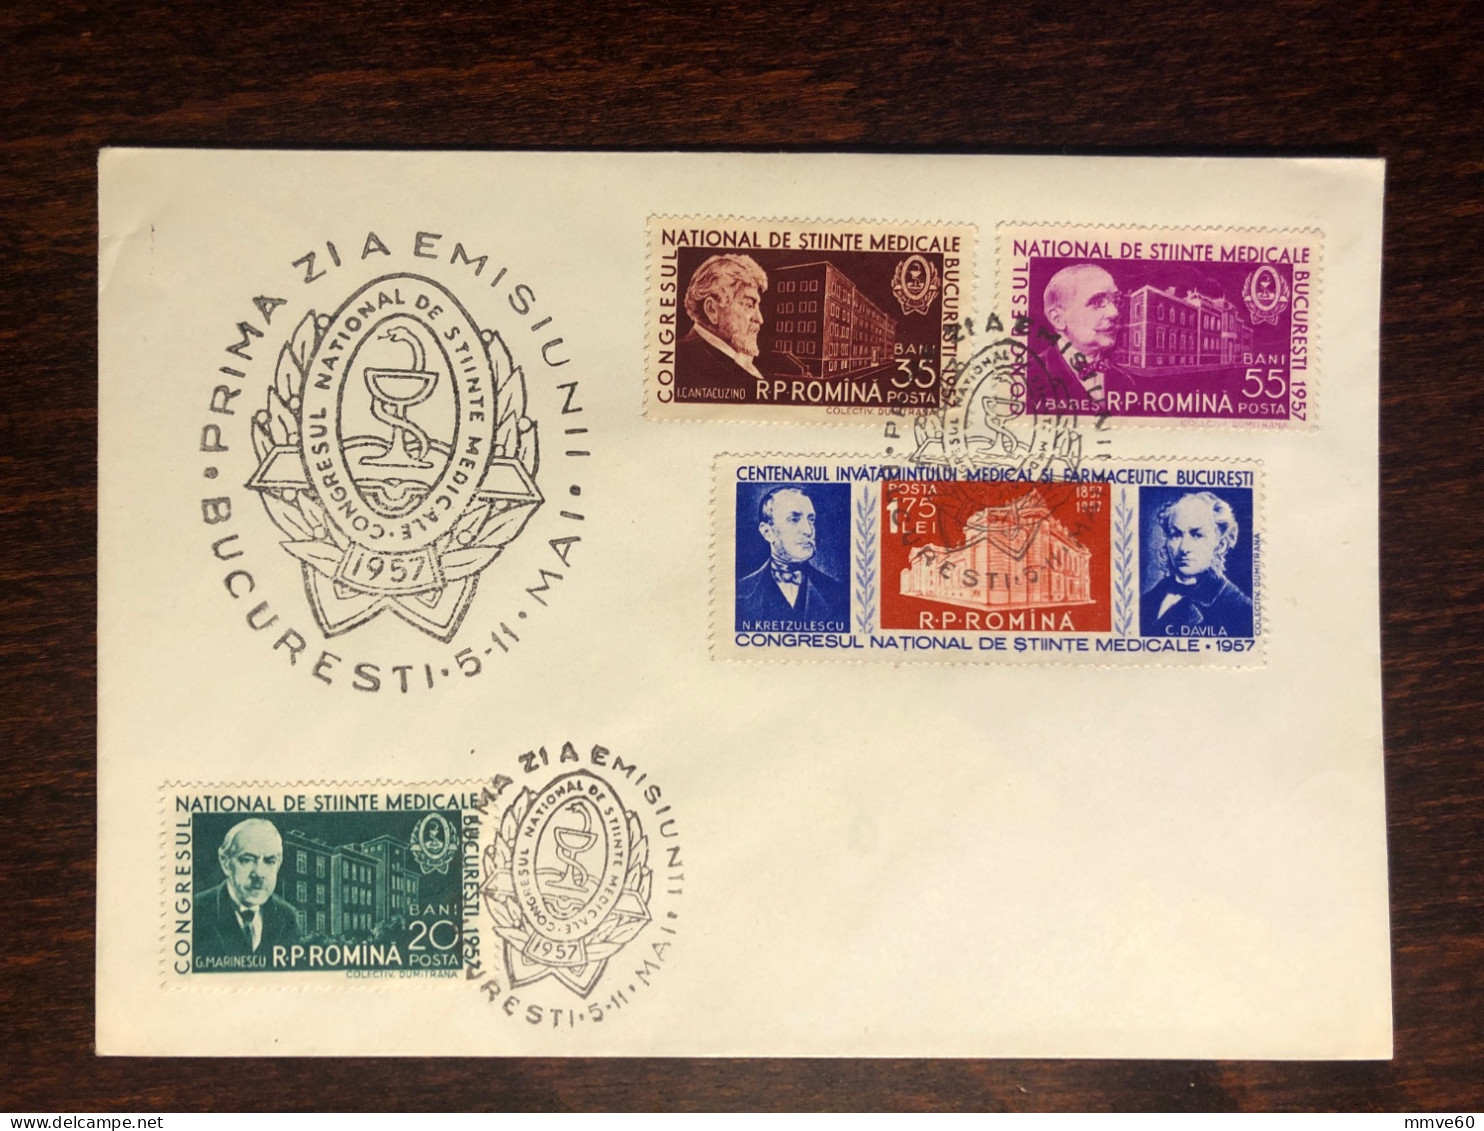 ROMANIA FDC COVER 1957 YEAR FAMOUS DOCTORS MEDICAL CONGRESS HEALTH MEDICINE STAMPS - FDC